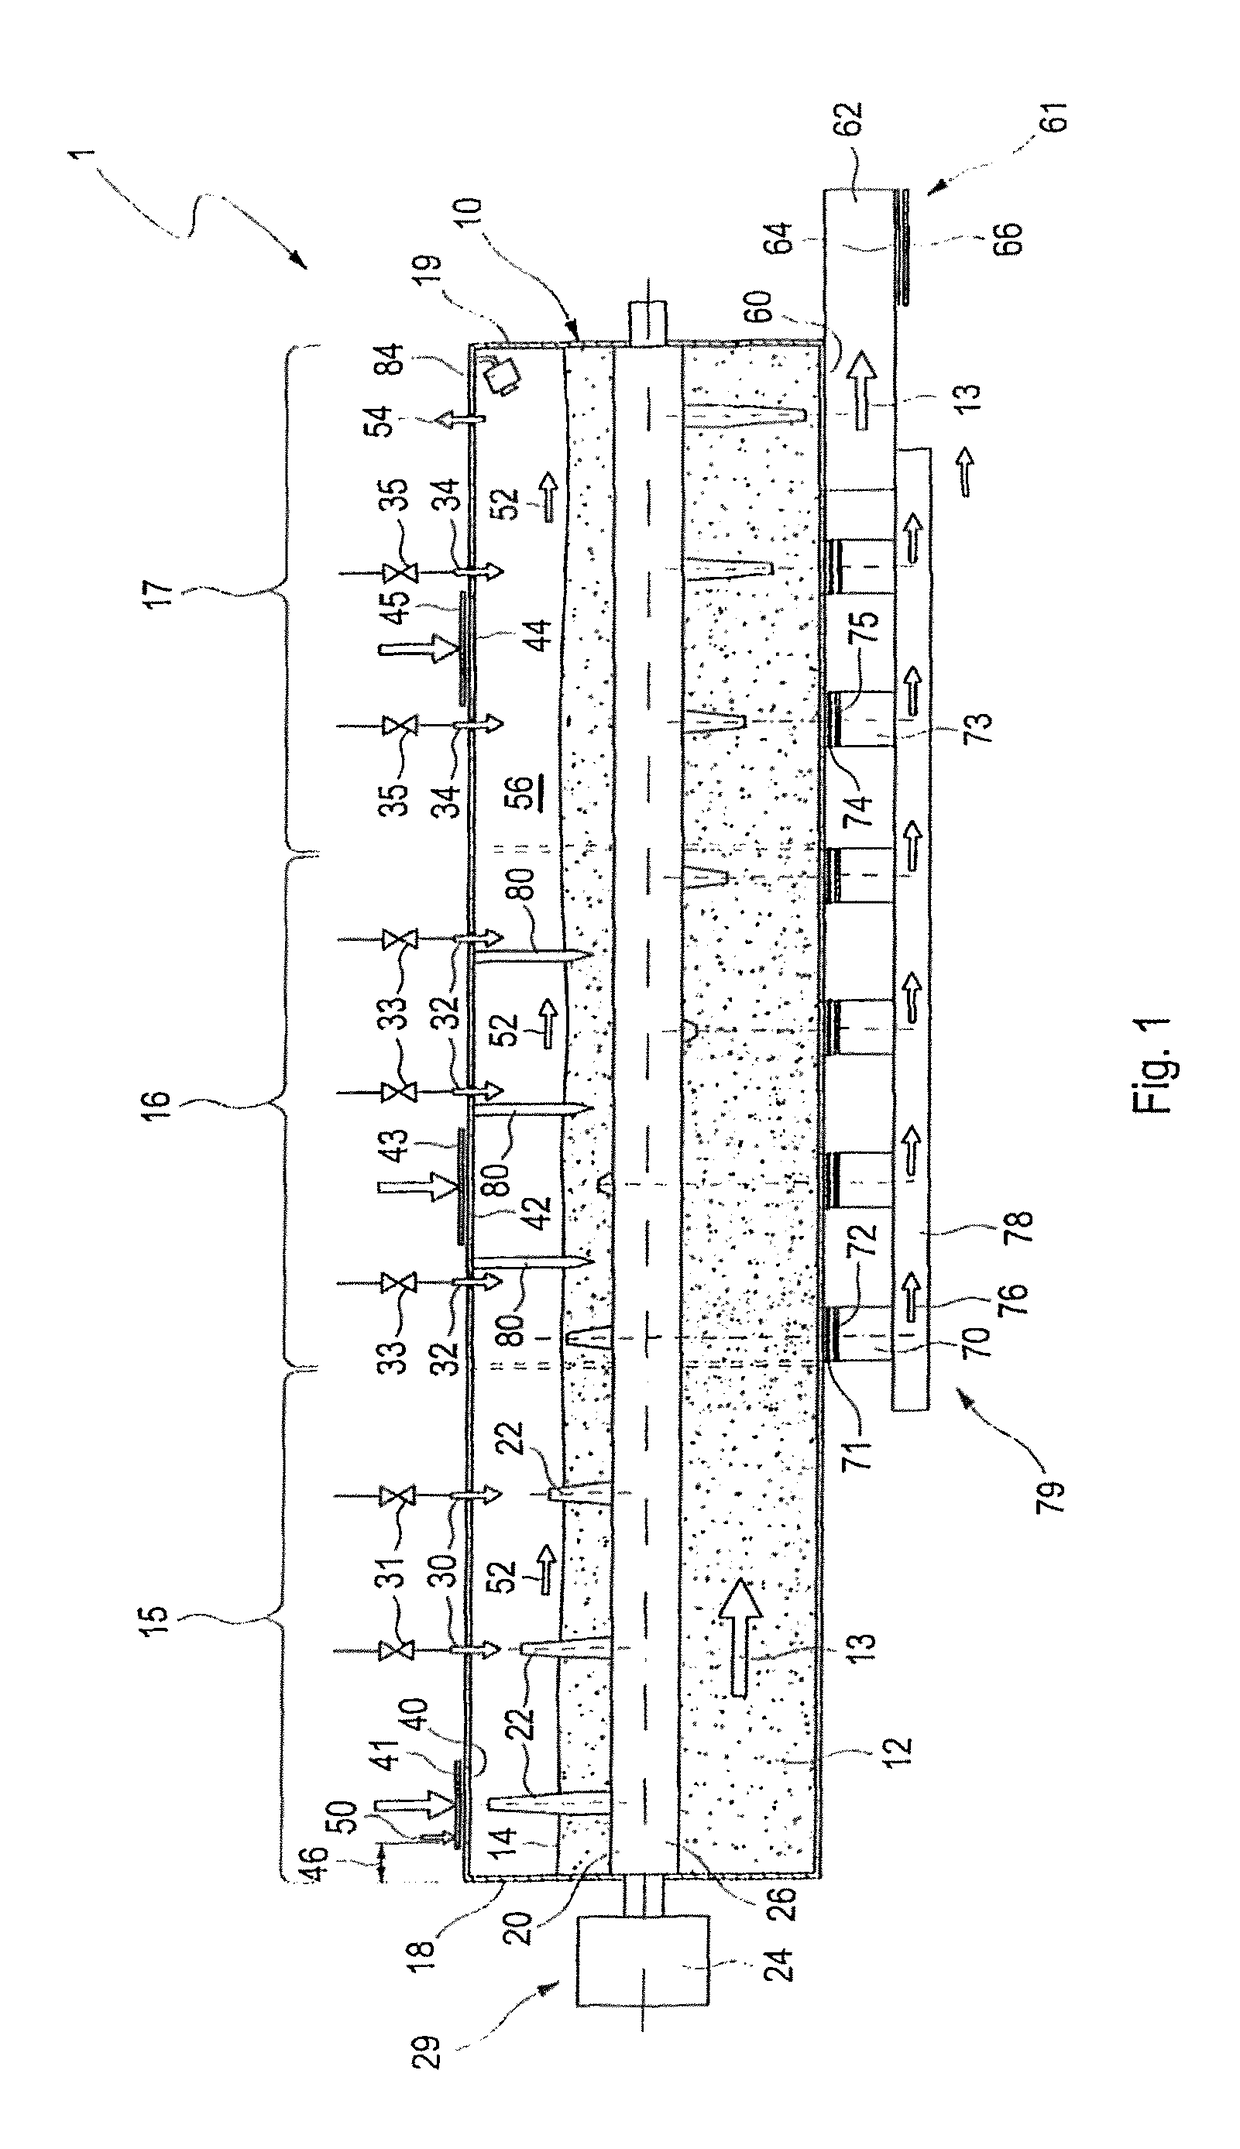 Method and device for the mechanical or mechanical-biological treatment of waste